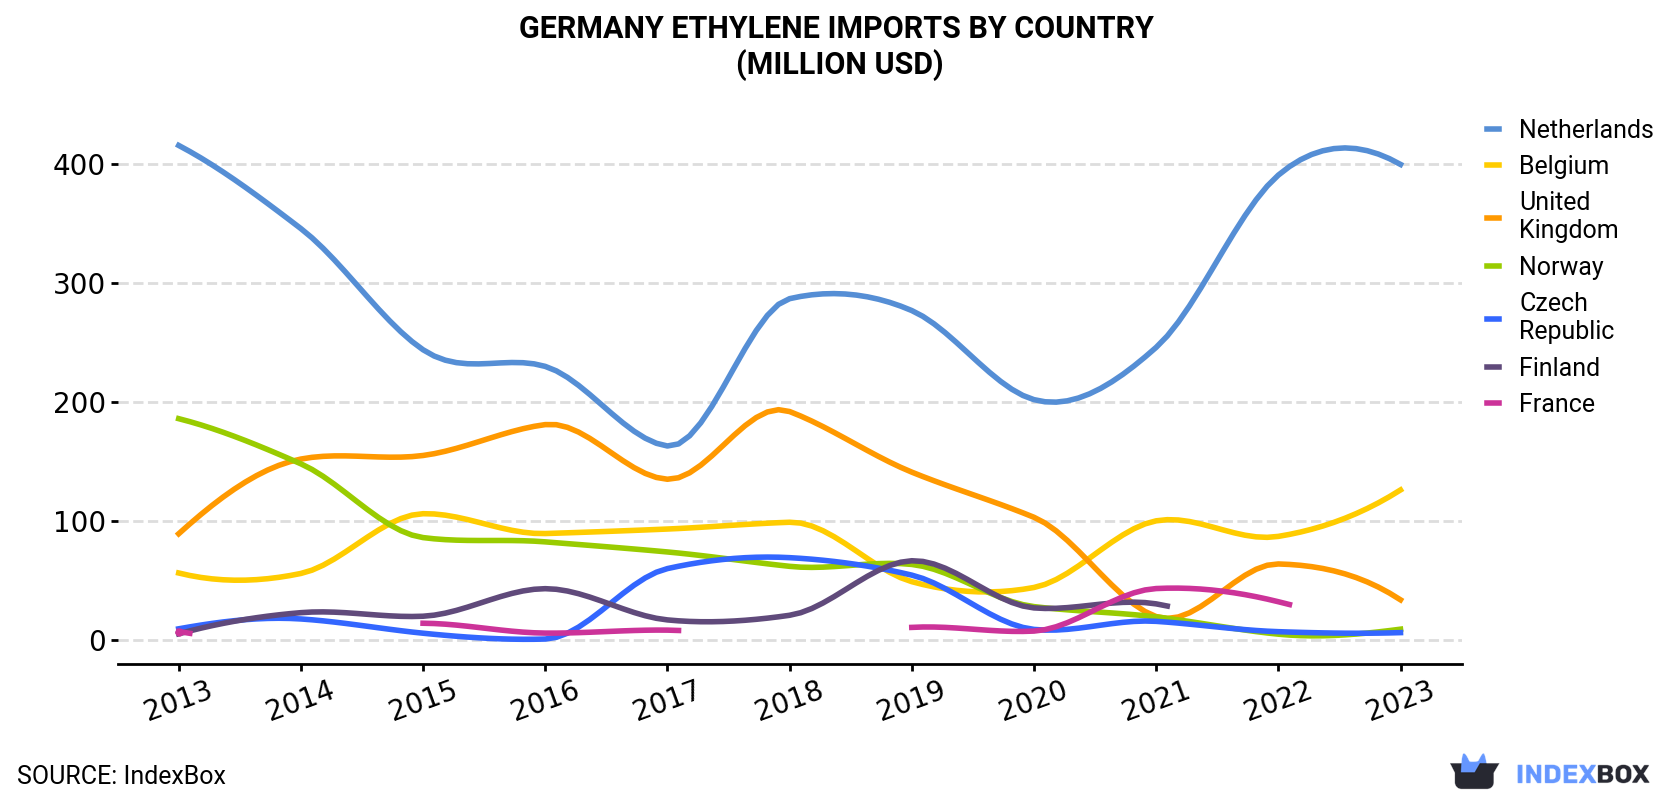 Germany Ethylene Imports By Country (Million USD)